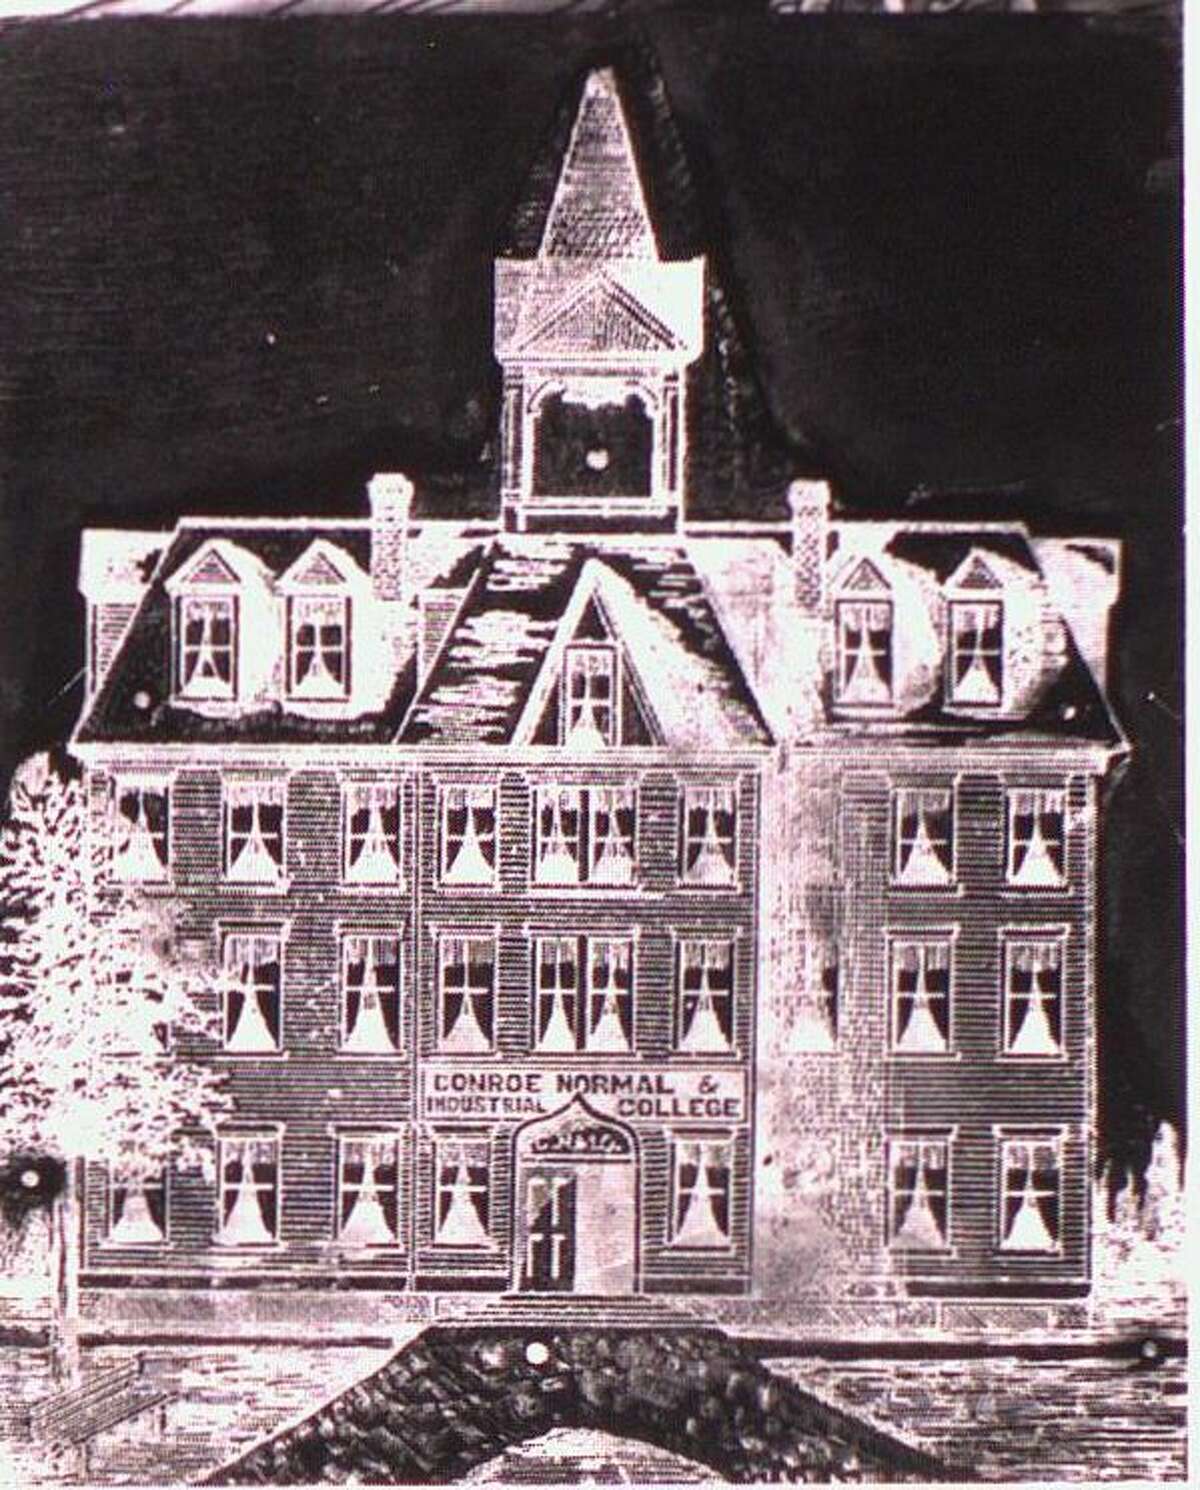 The main building of Conroe Normal and Industrial College on 10th Street in Conroe. Today only the Calhoun-Edwards Building remains.